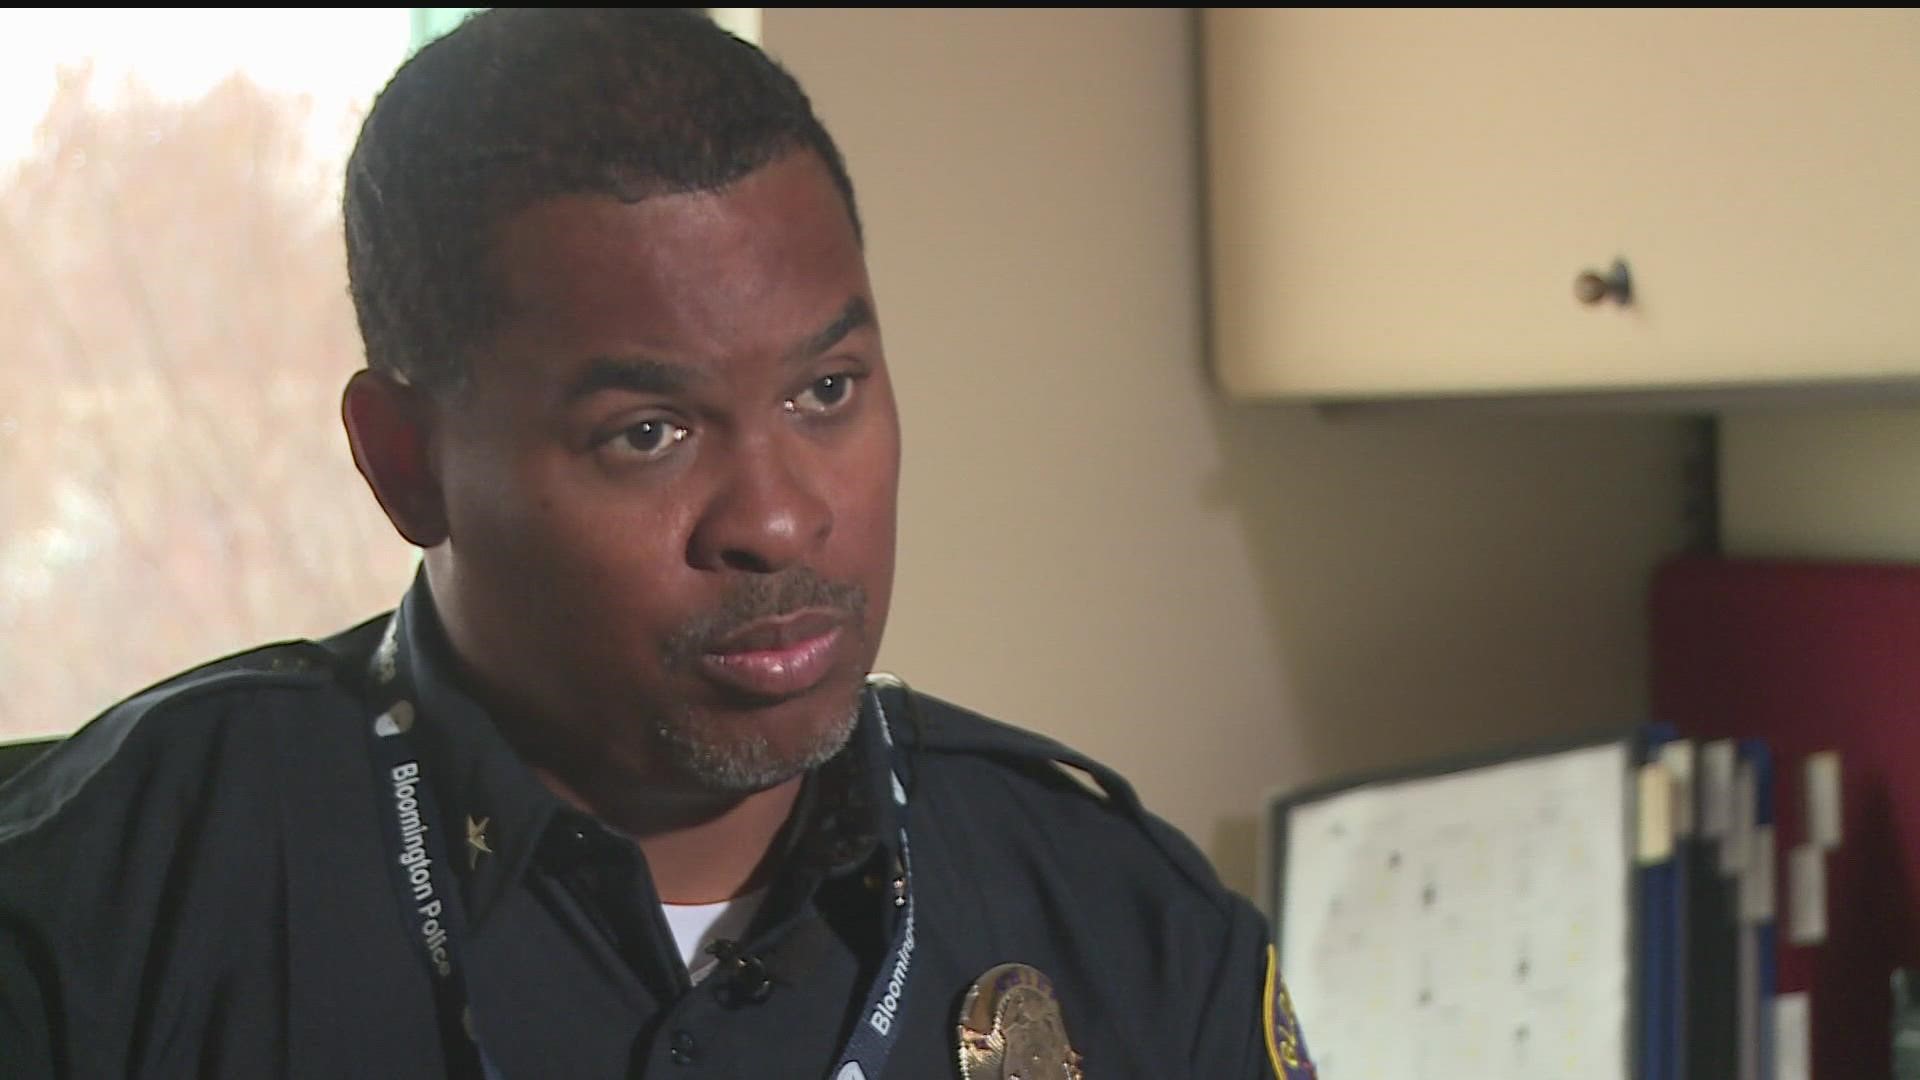 Bloomington Police Chief Booker Hodges, who last served Prior Lake chief, says he already has plans to implement lasting change within the department.